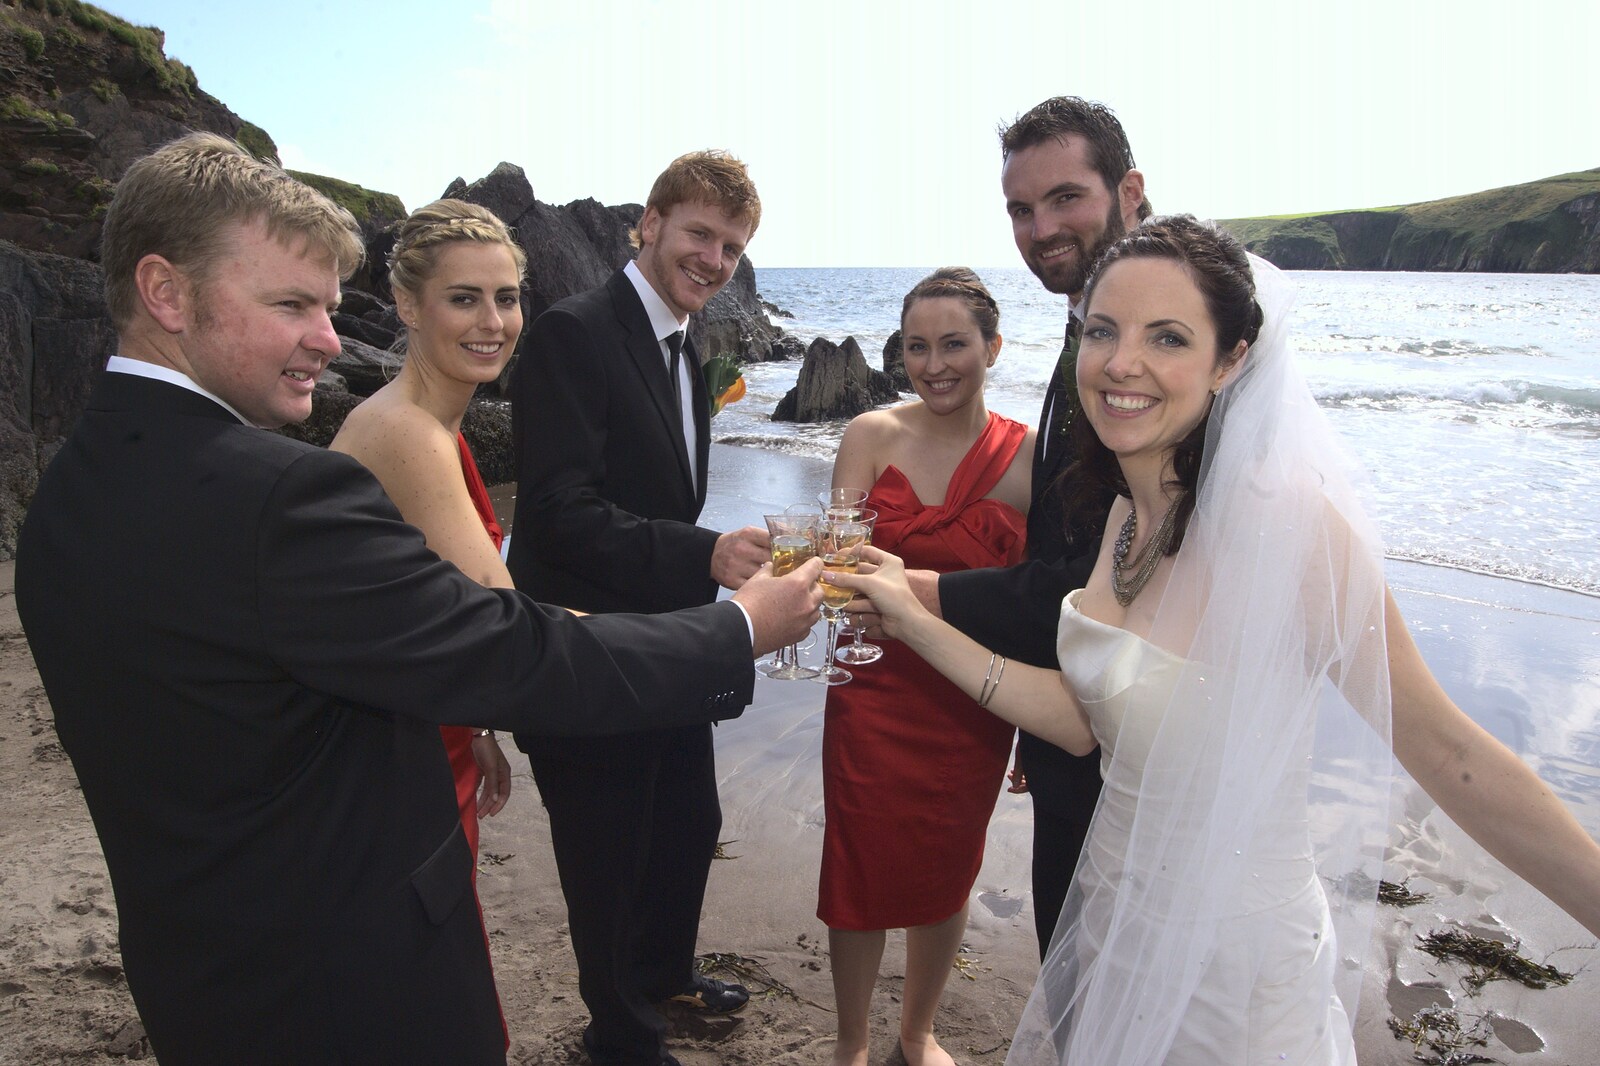 Champagne on the beach from Julie and Cameron's Wedding, Ballintaggart House, Dingle - 24th July 2009